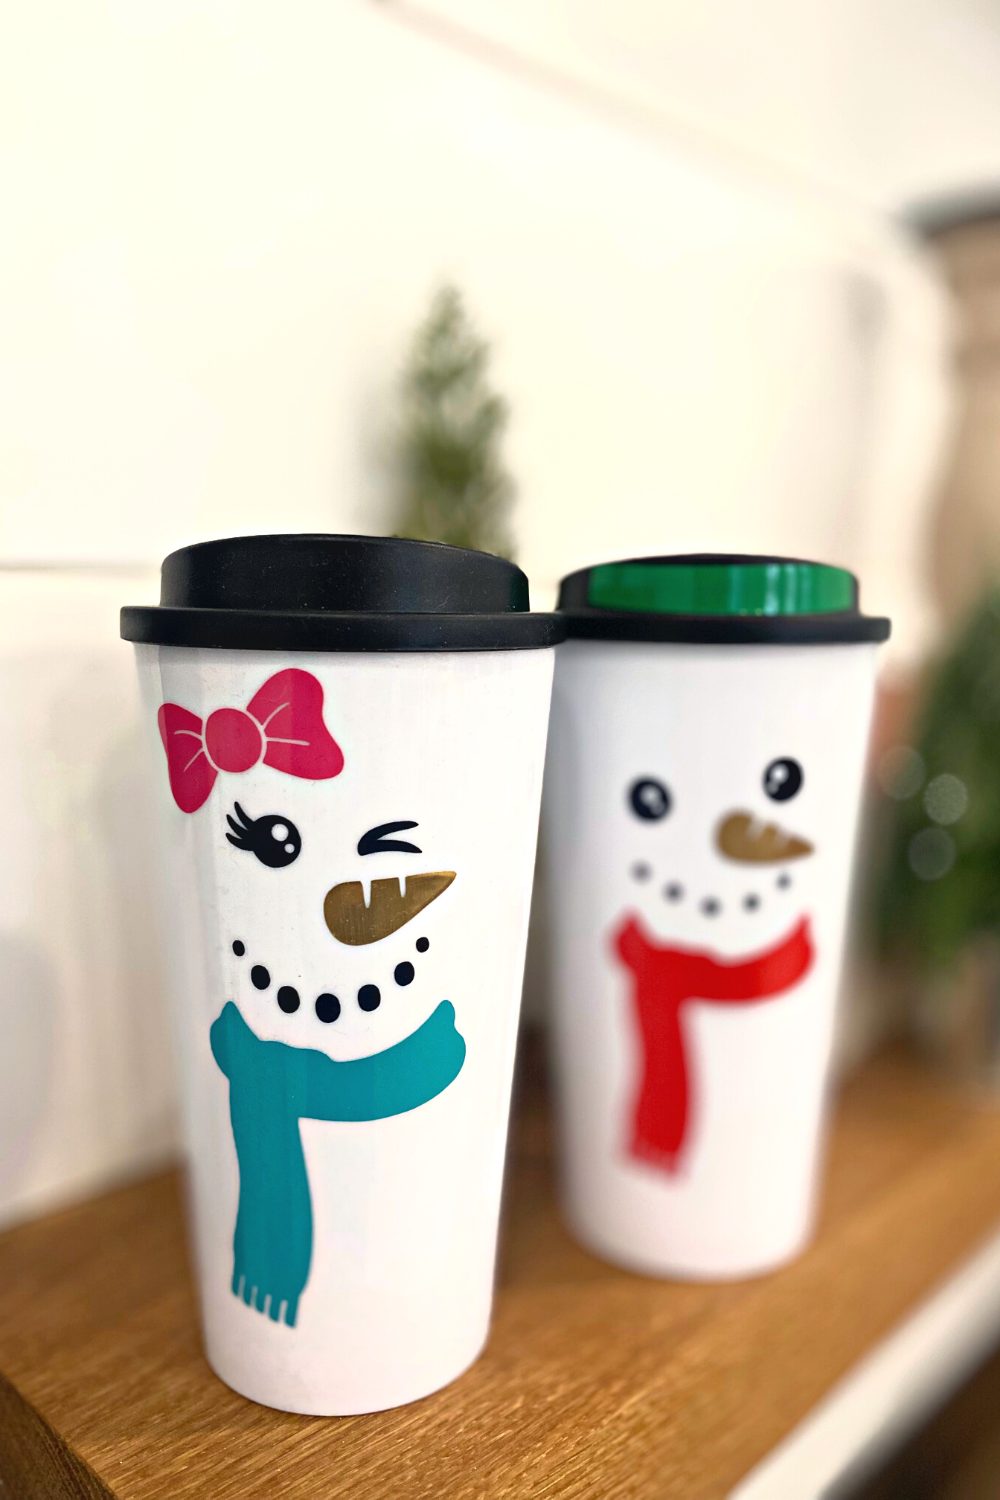 Design Your Own Holiday Travel Mug - Double Walled Cup, Kids Arts & Crafts,  Xmas